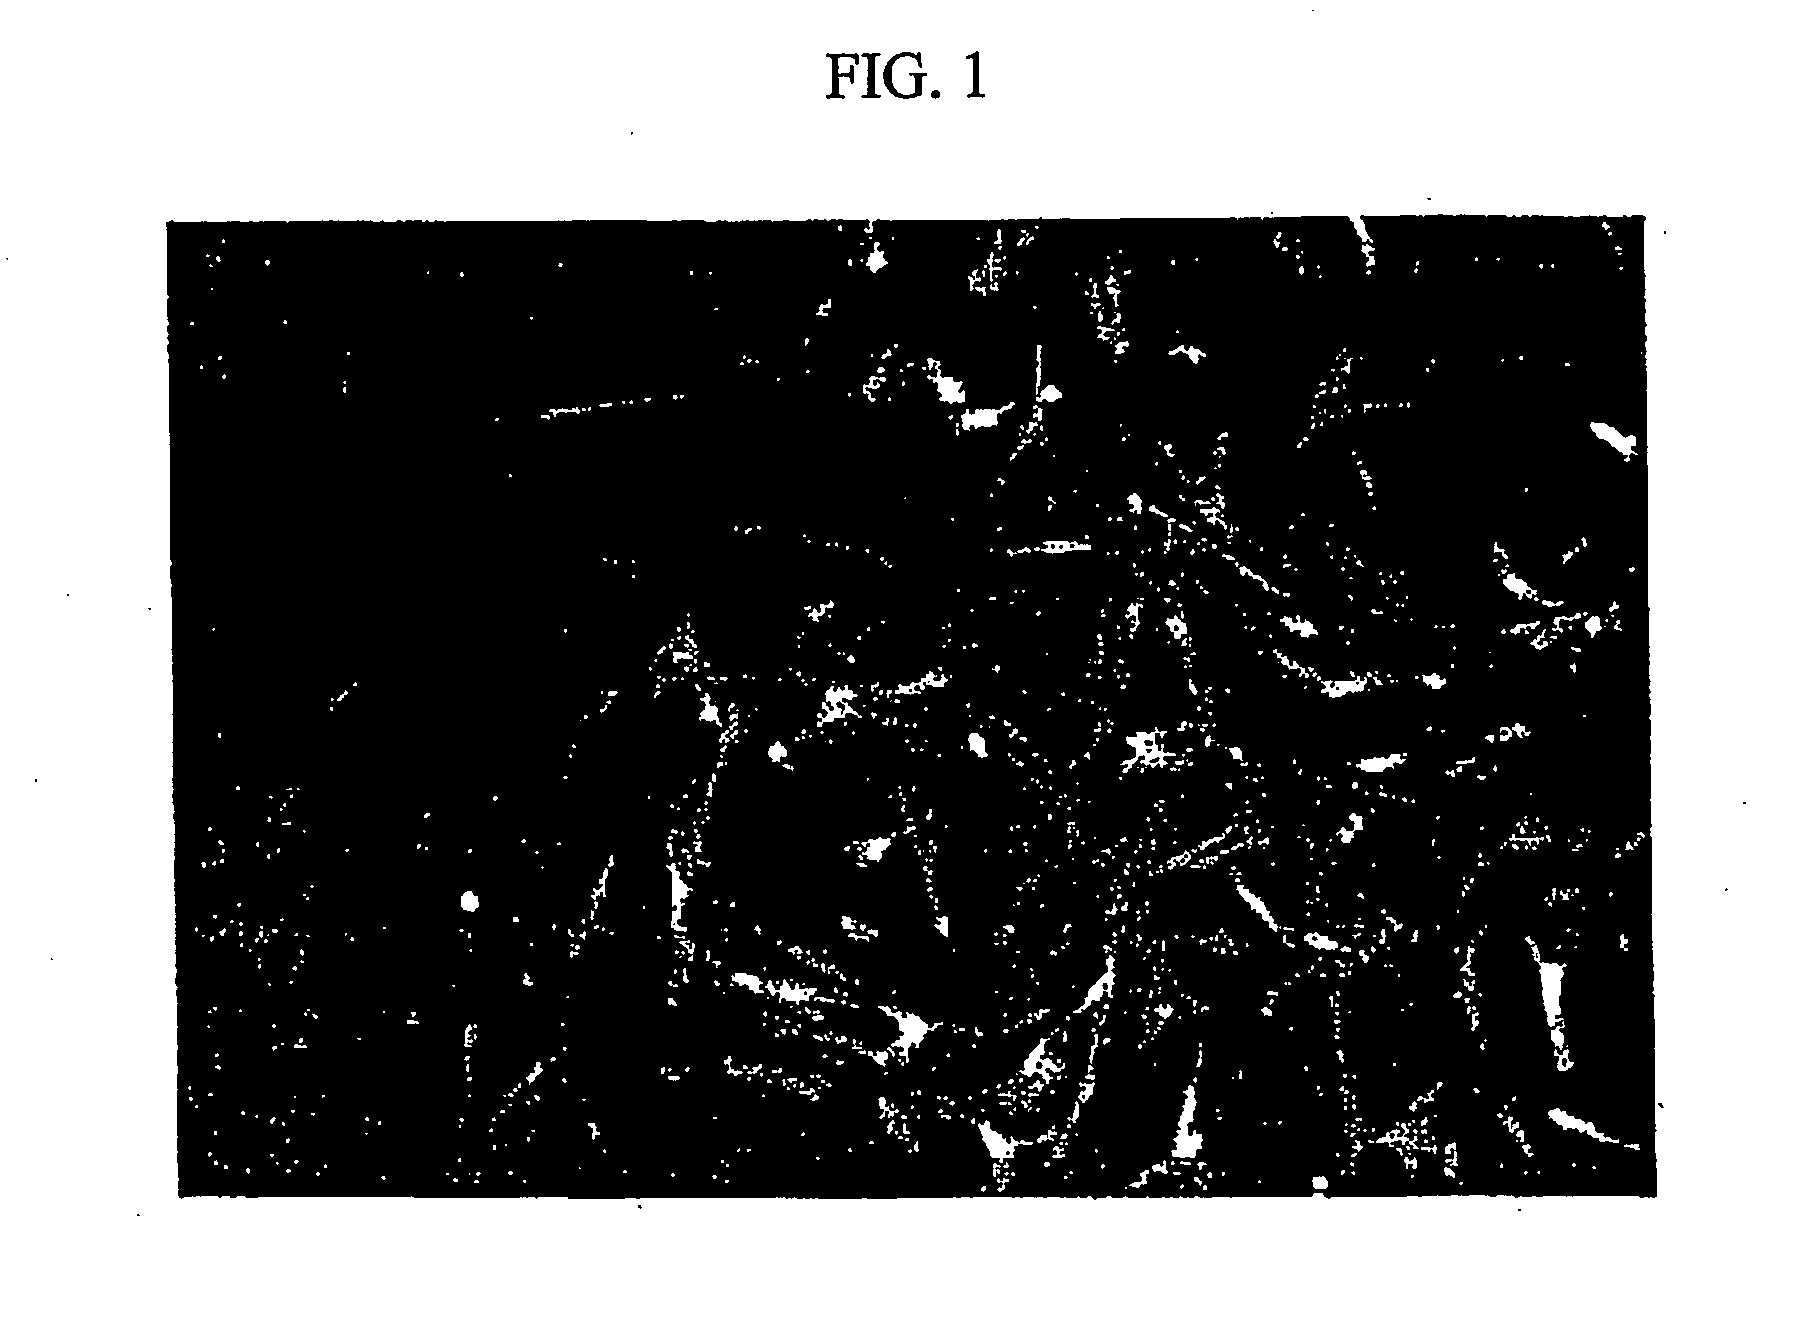 "Gfp-transfected clon pig, gt knock-out clon pig and methods for productions thereof